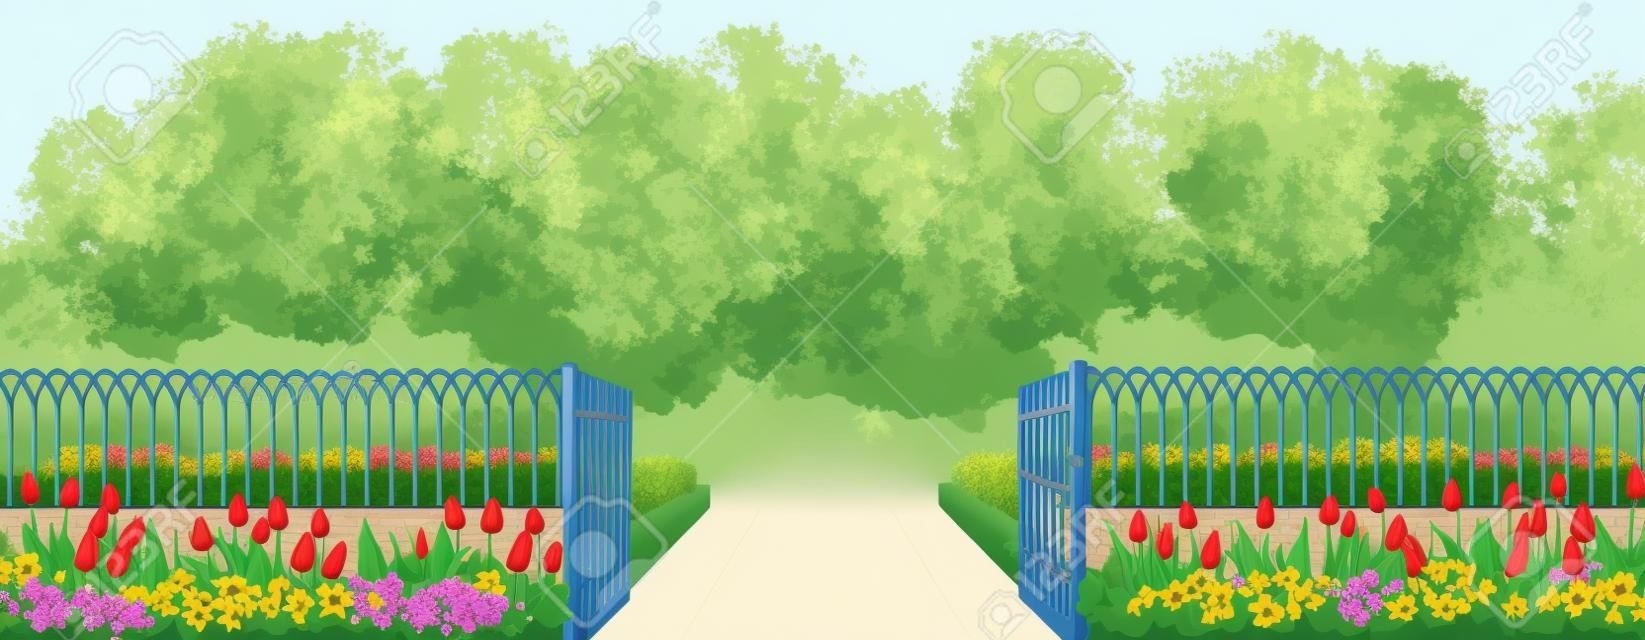 Entrance, fence with a gate, a flower bed and flowers, tulips in cartoon style. vector illustration